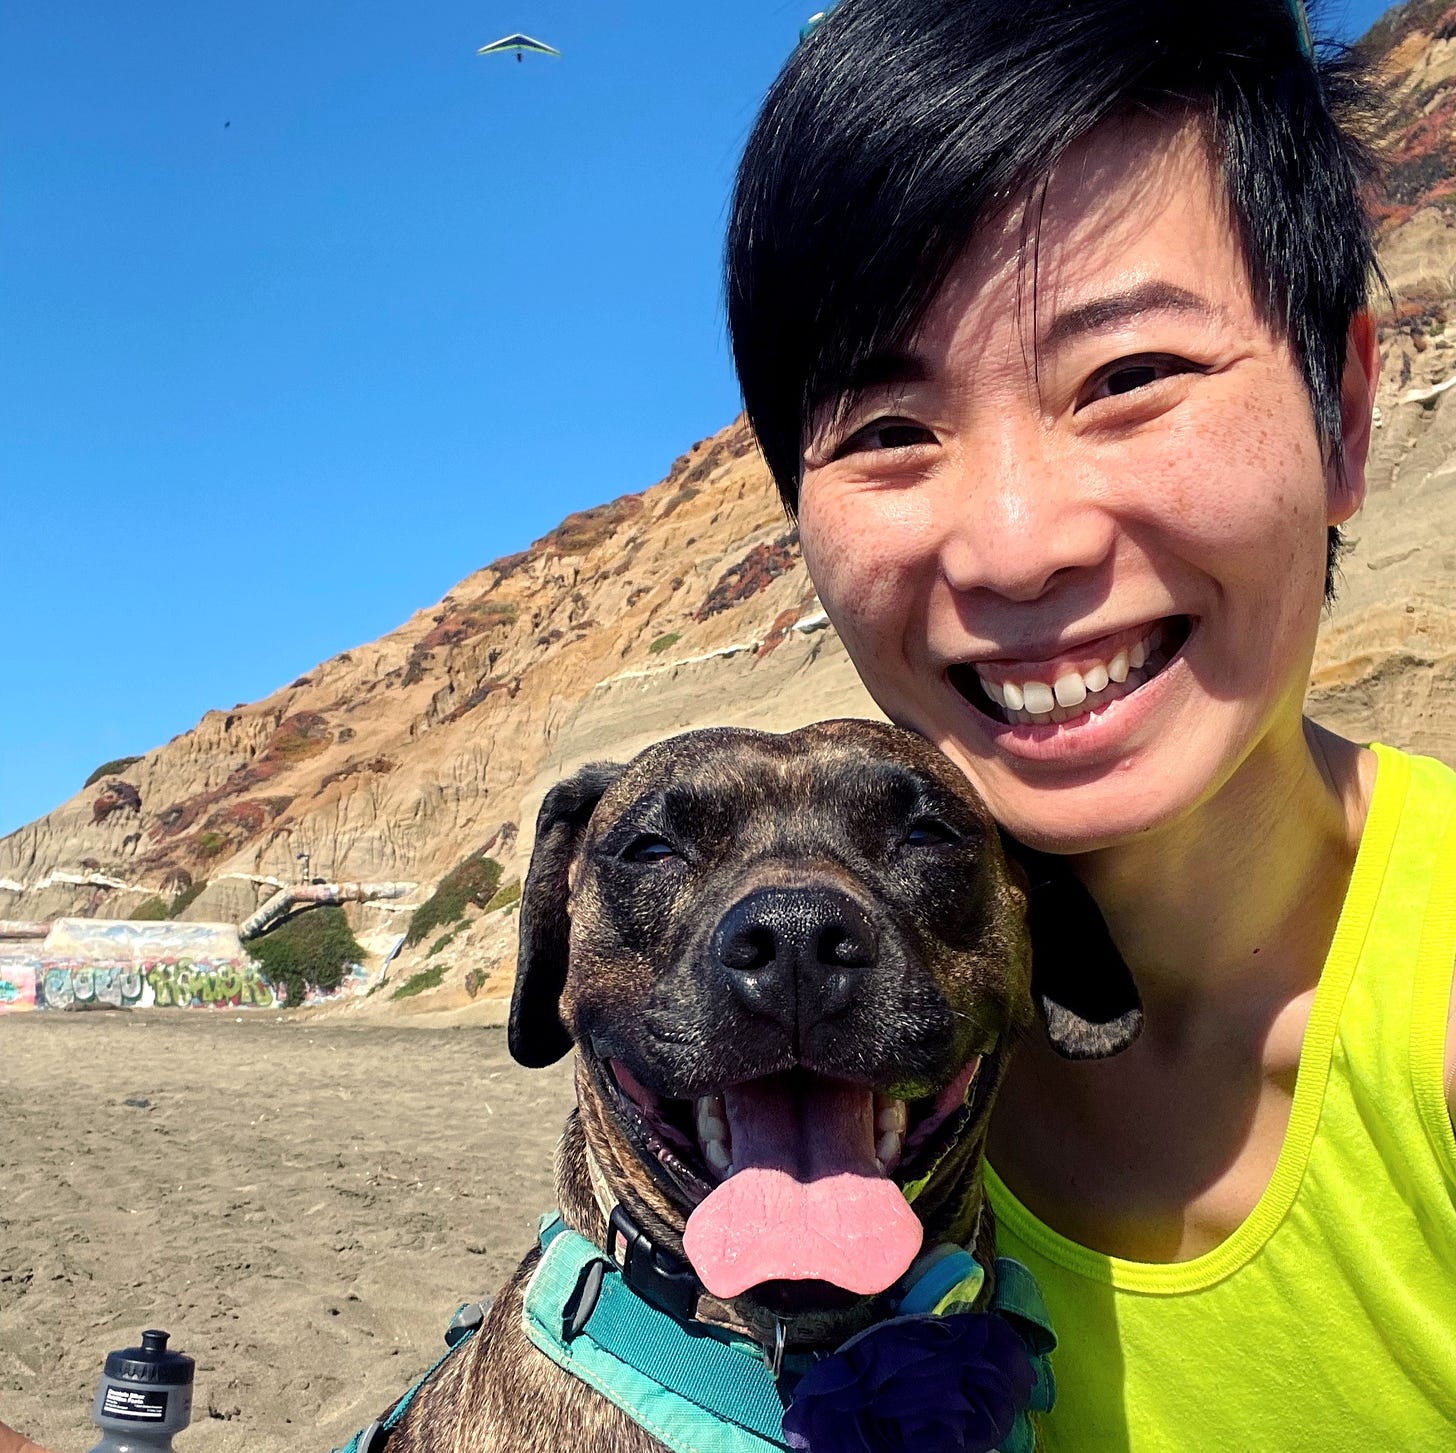 brindle dog with floppy ears grinning at camera next to an east asian woman with a pixie haircut & highlighter yellow tank top